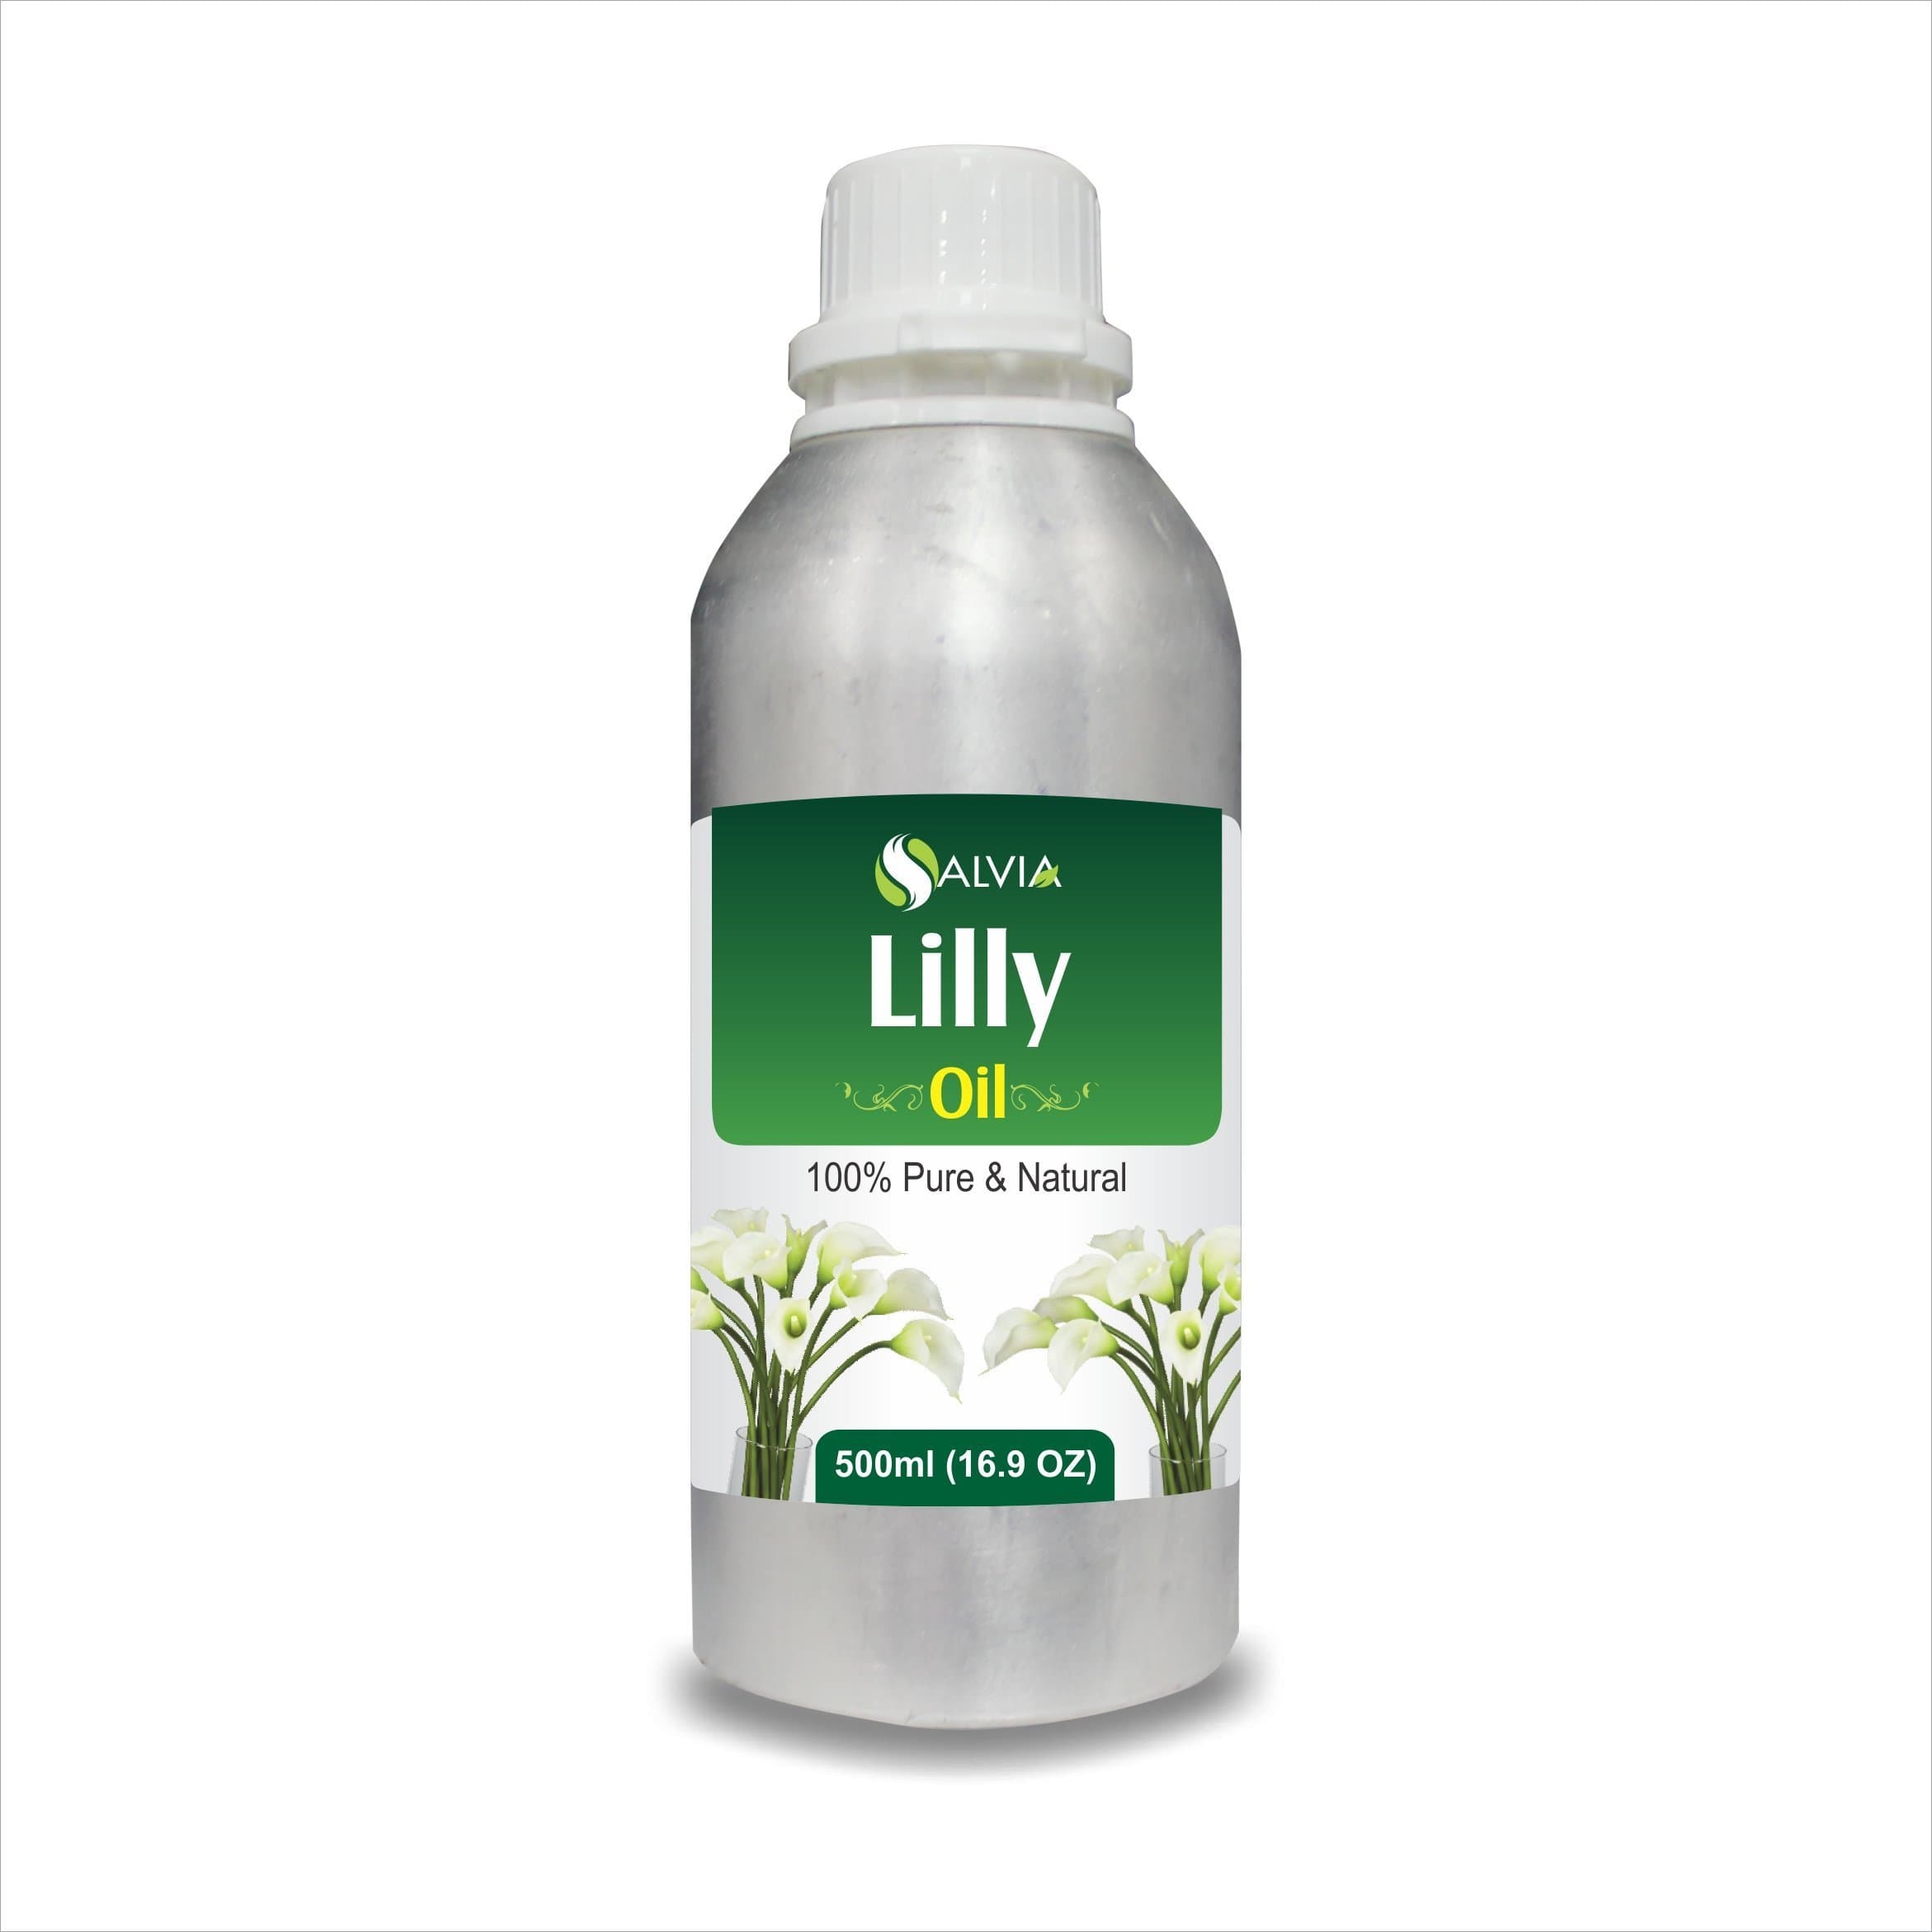  lily oil benefits for skin